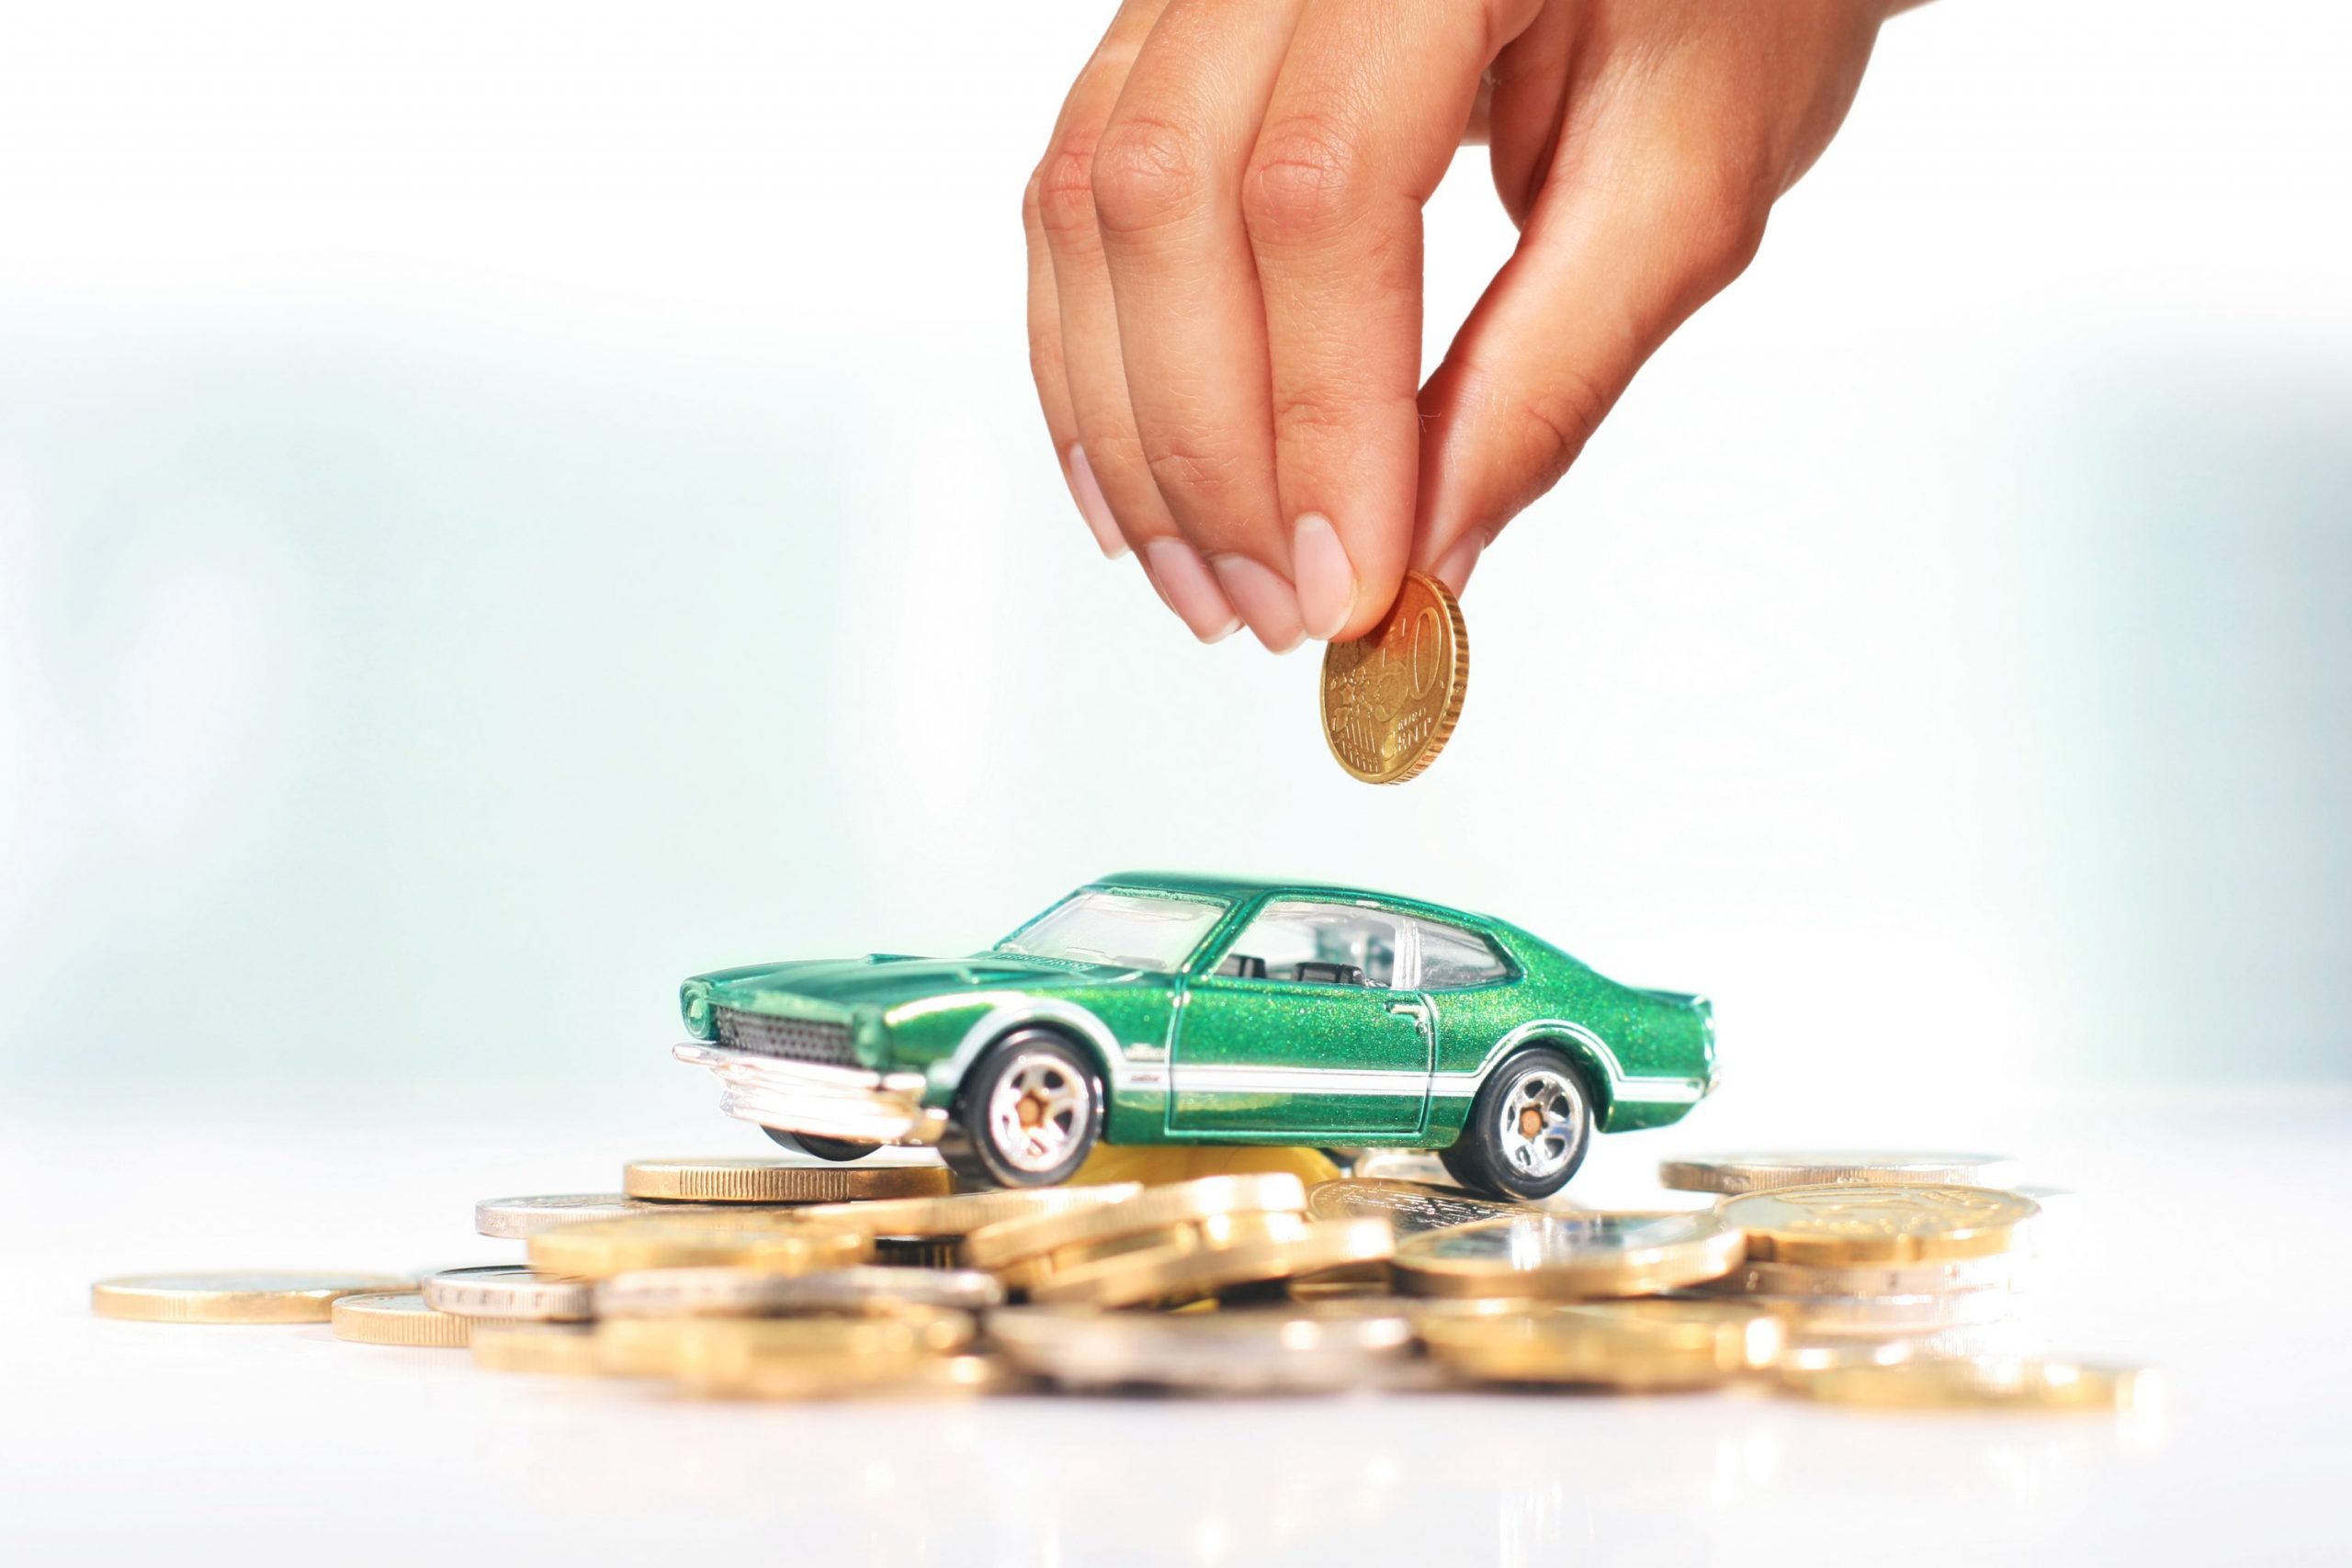 5 Car Insurance Buying Tips For First